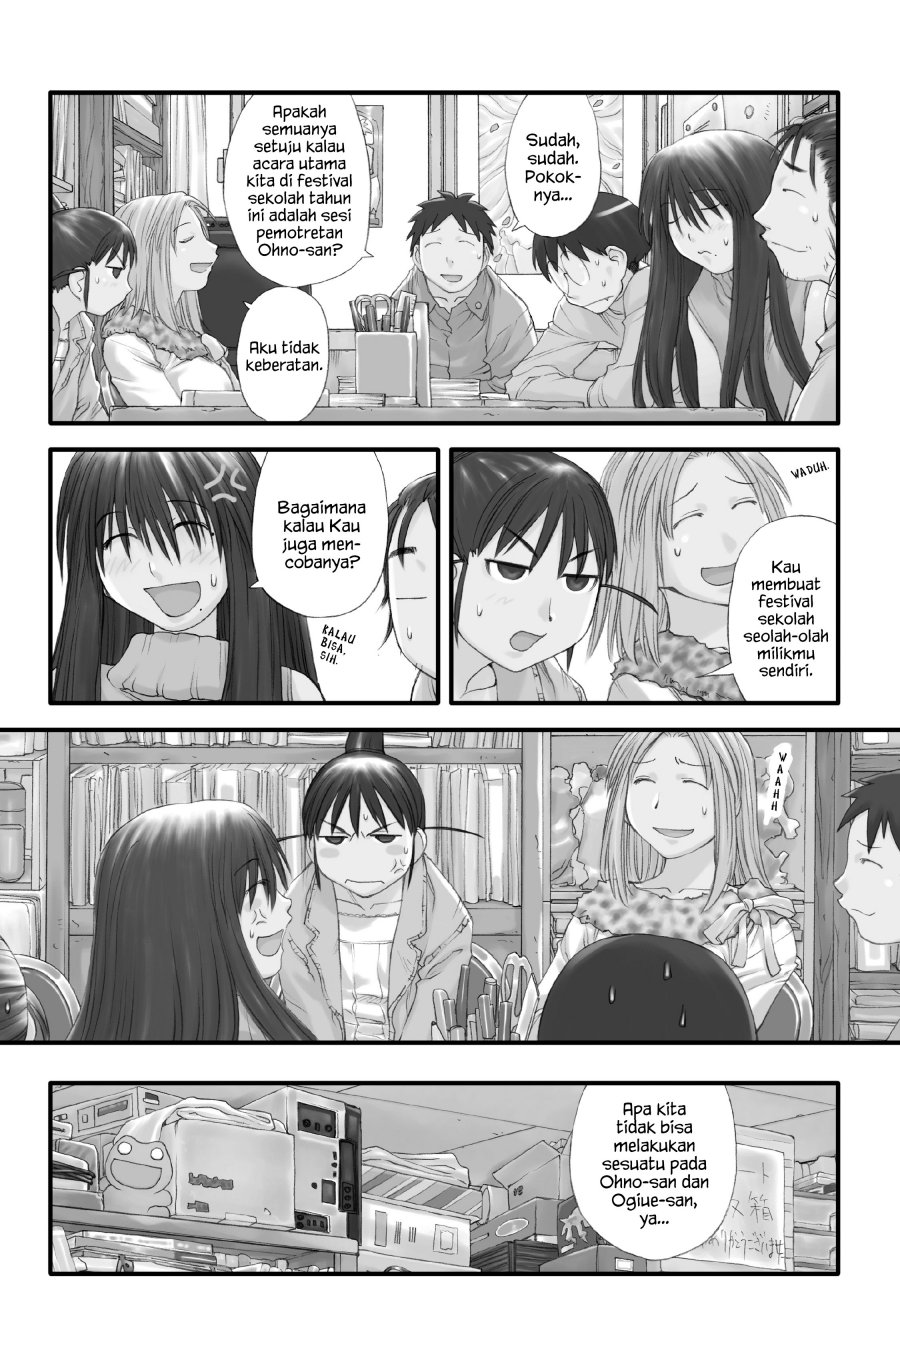 Genshiken – The Society for the Study of Modern Visual Culture Chapter 31 Image 5